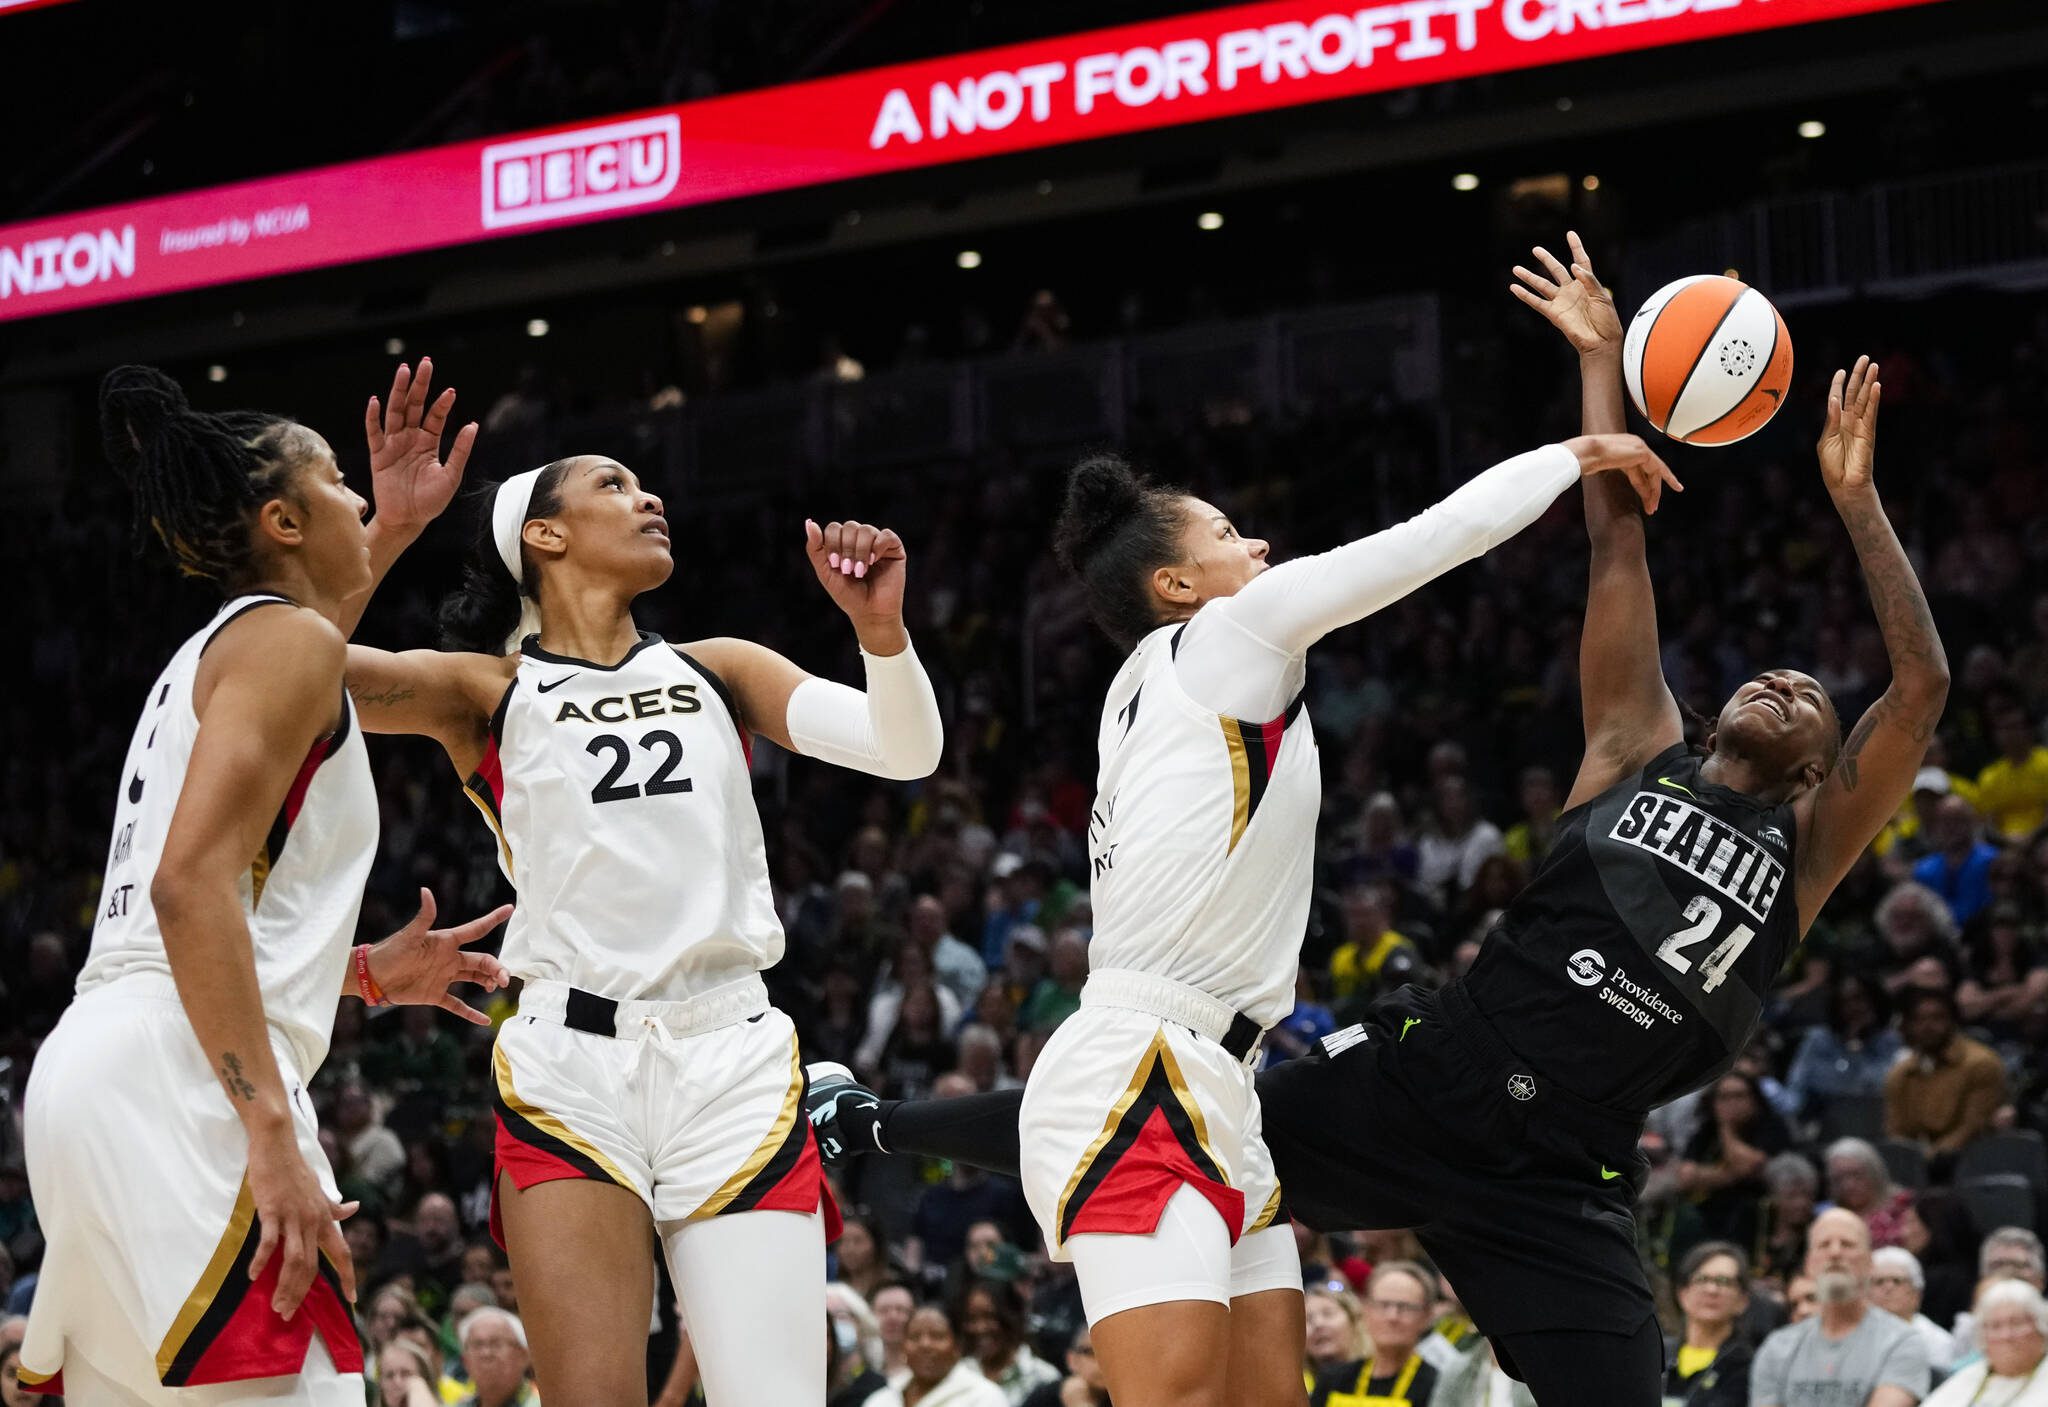 Storm guard Jewell Loyd (24) has her shot blocked by Aces forward Alysha Clark (7) as forward A’ja Wilson (22) and forward Candace Parker look on during the first half of a game Saturday in Seattle. (AP Photo/Lindsey Wasson)